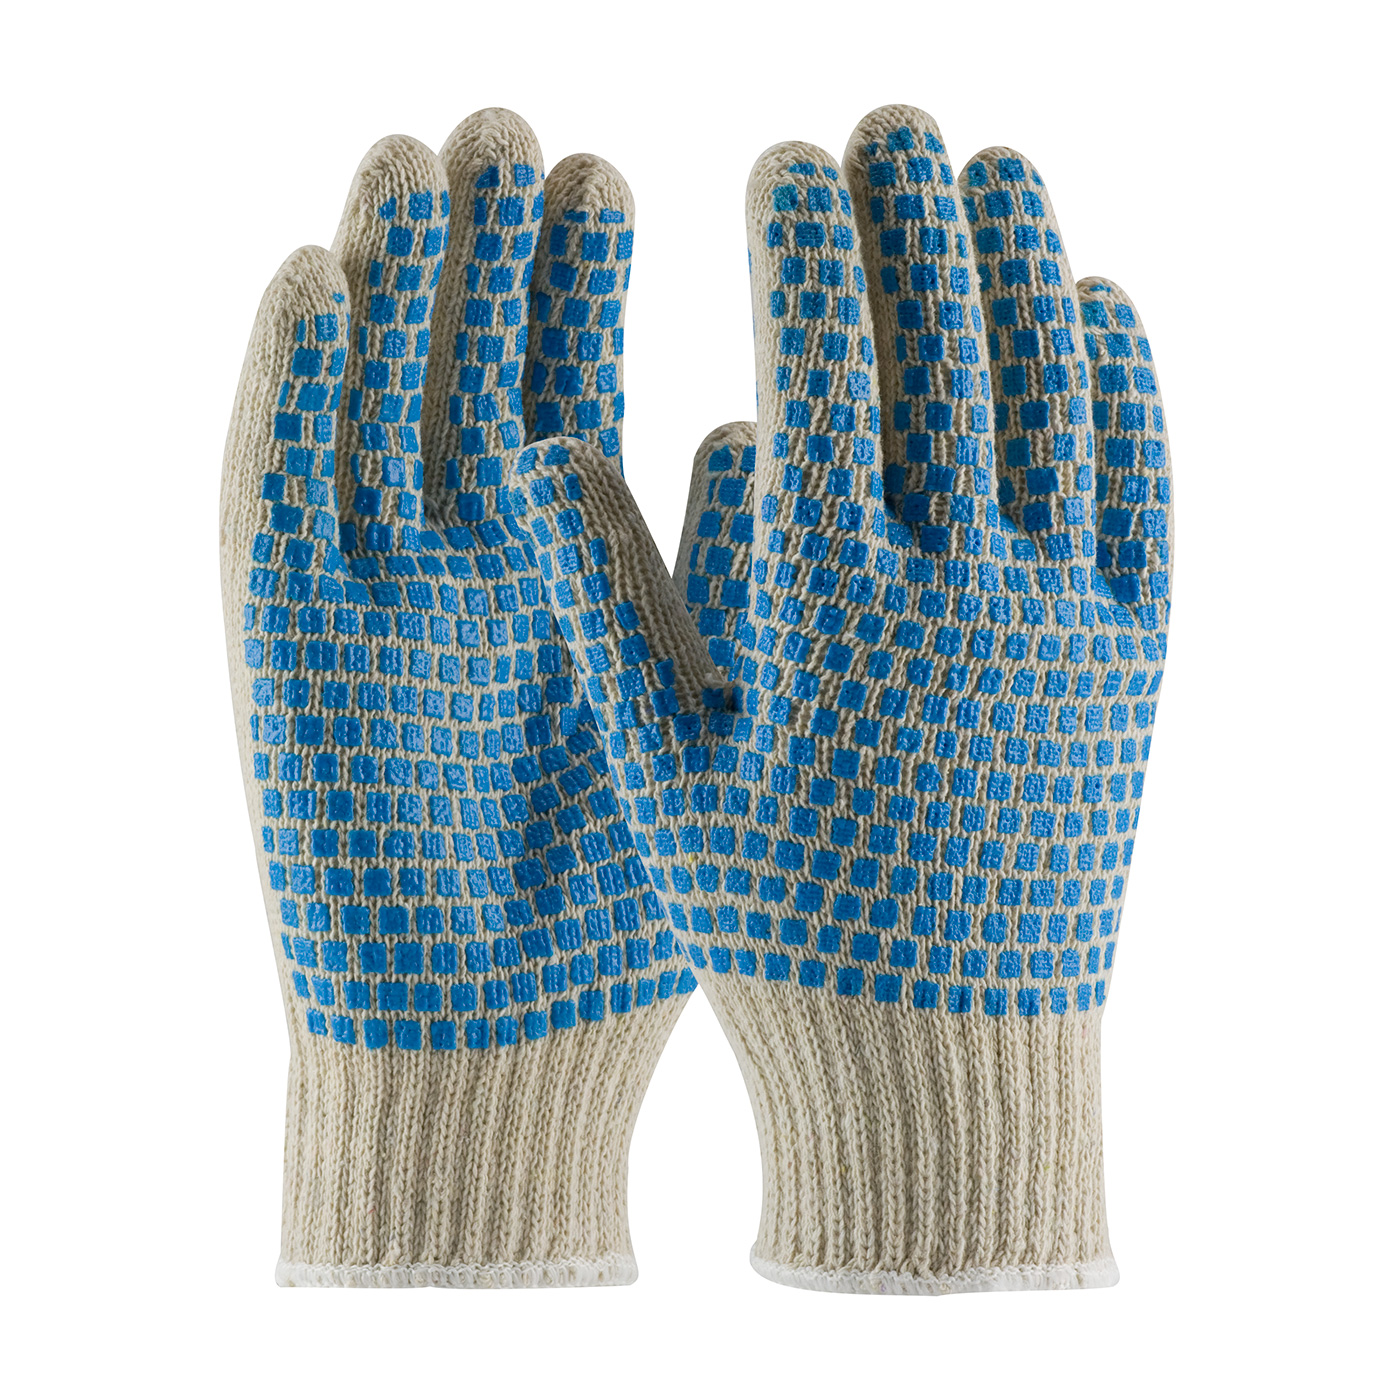 PIP® Seamless Knit Cotton / Polyester Glove with Double-Sided PVC Brick Pattern Grip - Regular Weight #36-110BB